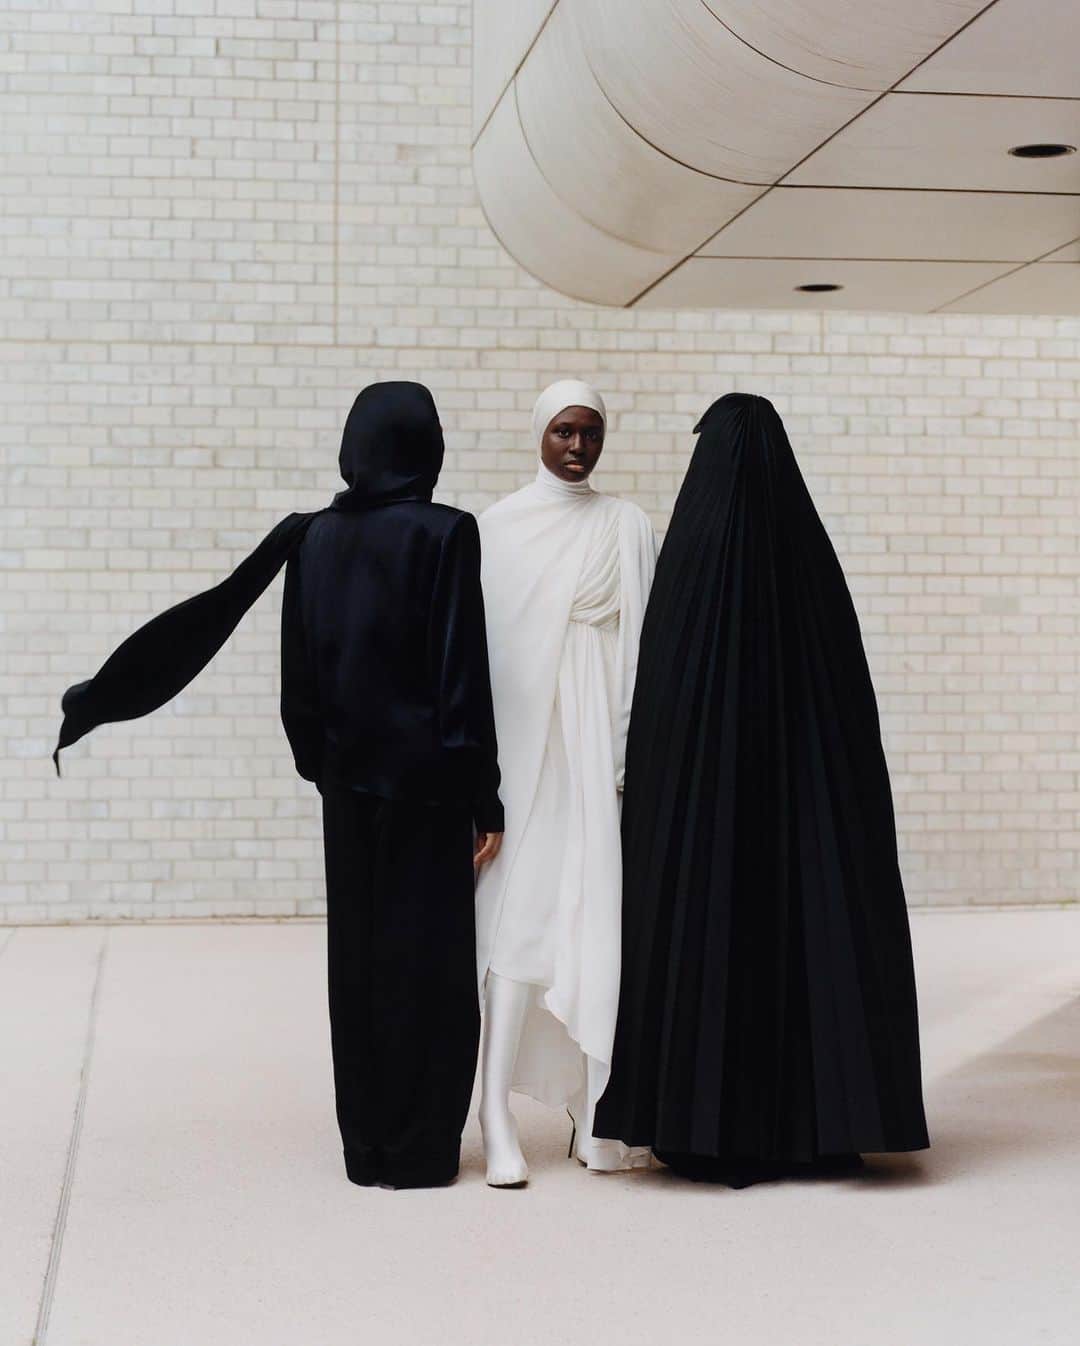 Dazed Magazineさんのインスタグラム写真 - (Dazed MagazineInstagram)「The French state’s efforts to defend women’s rights and prevent ‘separatism’ while further entrenching the ban on the hijab and other religiously affiliated clothing, are entirely self-defeating. All credit is due to the Muslim women and girls who have chosen to stake their own claim to Frenchness 🙌  “The media talks about the hijab all the time. It’s broadcasting news all day, often platforming the extreme right. There’s not a single day you don’t hear about Arabs, Muslims or immigrants on the news. But the media is portraying a version of us that doesn’t exist.” — Salimata Sylla   “We’re still going to fight, we’re not going to let it go. We have more and more girls that join us every day. This is just the beginning.”   Tap the link in bio to explore more 🔗  Featuring Founé Diawara, Hawa Doucouré, and Yousra of @leshijabeuses, Salimata Sylla @sali_7, Loubna Reguig loubnarchives, Ania Khelaf @ania.tayri, Sarah B @saraahh.bni, Hiba Latreche @hibalat  Photography @gunsahma Styling @omaimasss Hair @oummy_youssoufa Make-up @minkimmakeup Production @wagmbh Post Production @_thehandofgod  Text @tiara.sahar  Editor-in-Chief @ibkamara Art Director @gareth_wrighton Editorial Director @kaci0n Fashion Director @imruh  1. Ania wears gabardine dress and leather pumps @prada, cotton bodysuit worn underneath @wolford. 2. From left: Salimata wears technical moiré coat @dior, cotton bodysuit worn underneath @wolford. Loubna wears all clothes @maisonalaia. Hiba wears scuba and silk dress @gucci, hooded top worn underneath @marineserre_official. 3. Founé wears technical silk dress @balenciaga. 4. Sarah wears spandex dress @maisonjsimone. 5. Hawa wears silk top @ysl by @anthonyvaccarello. 6. From left: Hawa wears all clothes @ysl by @anthonyvaccarello. Founé wears technical silk dress, spandex panta-boots @balenciaga. Yousra wears recycled polyester dress @cfcl_official, cotton bodysuit worn underneath @wolford, wool pleated Burça @burcakyol. 7. Founé wears technical silk dress @balenciaga. 8. Hawa wears all clothes @ysl by @anthonyvaccarello. 9. Hiba wears hooded top @marineserre_official.  Taken from the winter 2023 #THEBADDIEISSUE of #Dazed」11月29日 22時04分 - dazed